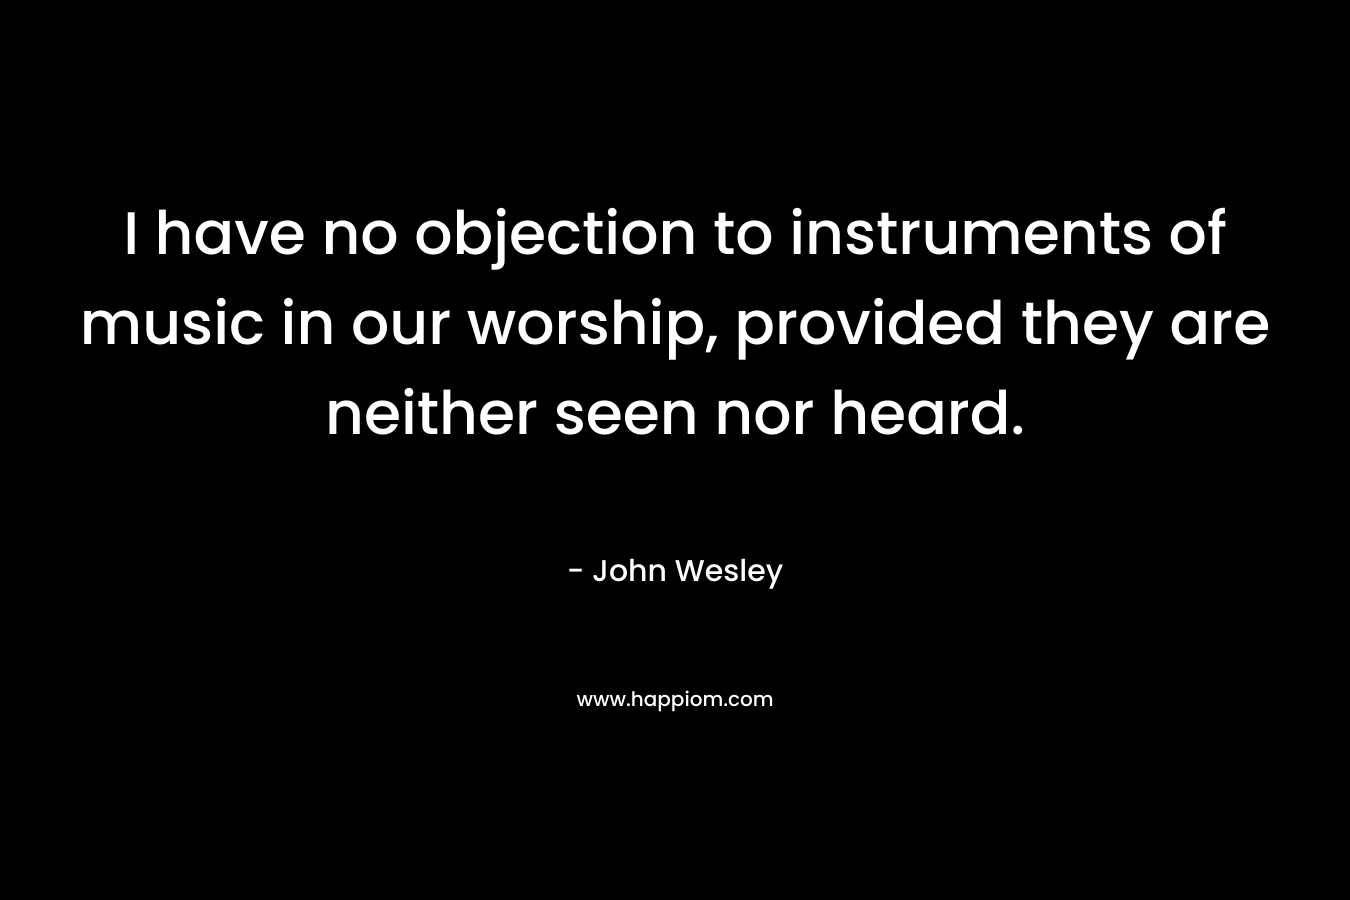 I have no objection to instruments of music in our worship, provided they are neither seen nor heard. – John Wesley